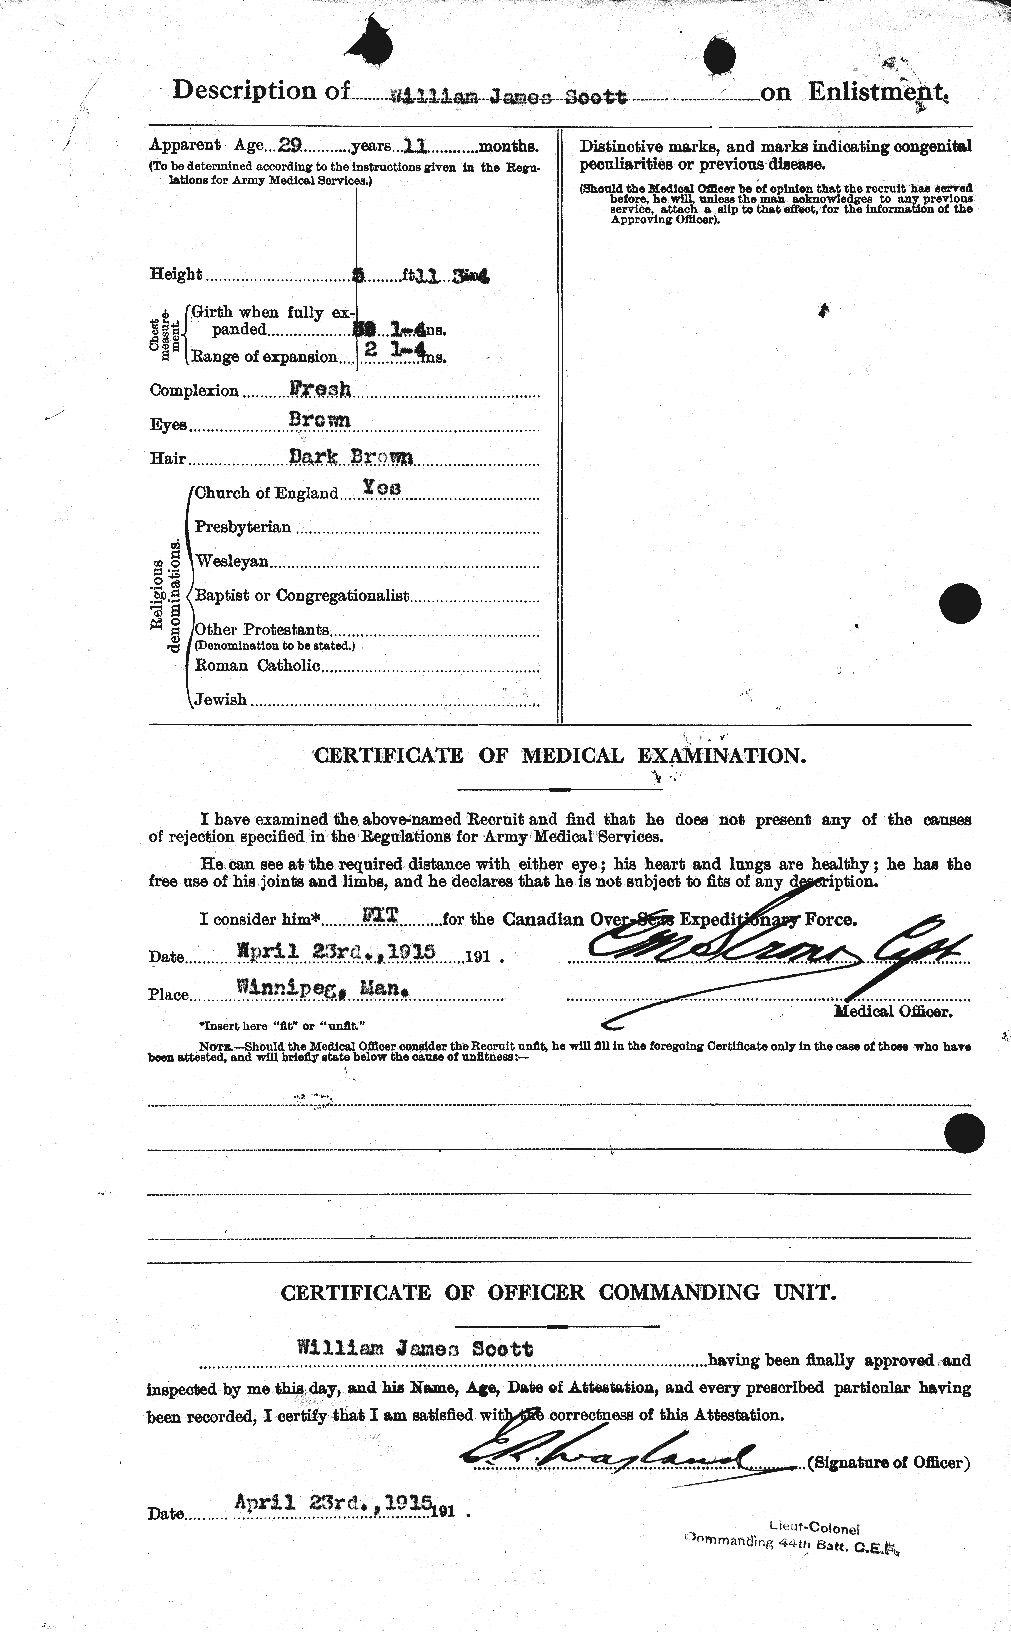 Personnel Records of the First World War - CEF 086770b